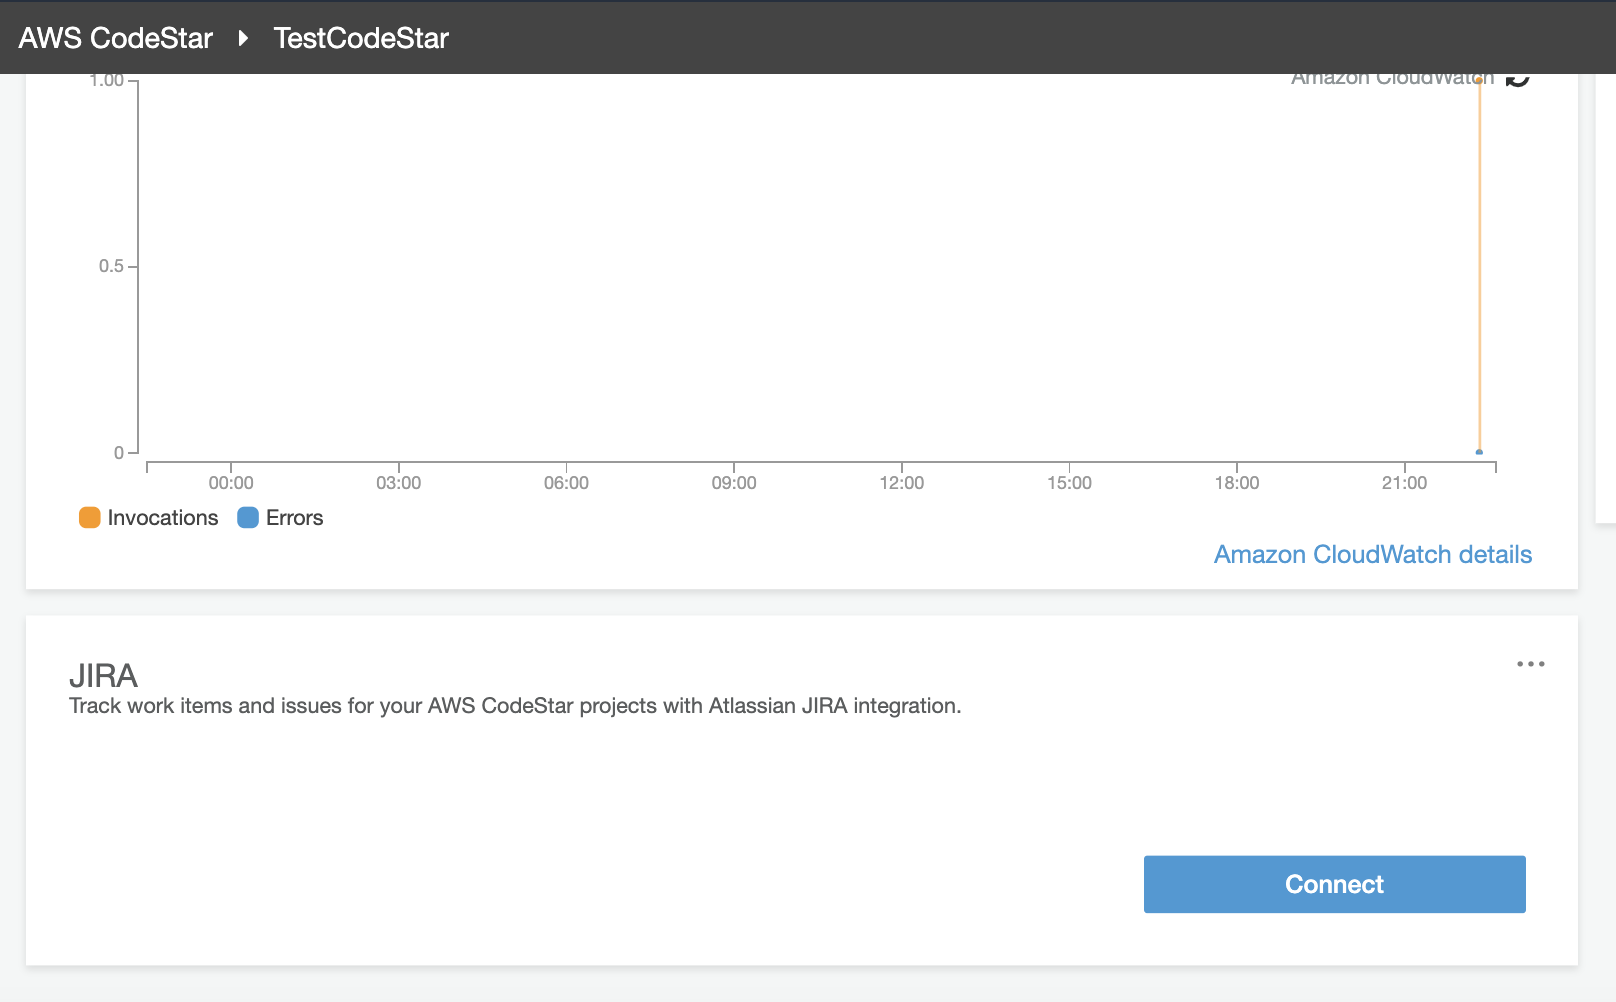 AWS CodeStar > TestCodeStar

0.54

o- .
T T T T T T T T
00:00 03:00 06:00 09:00 12:00 15:00 18:00 21:00

@ invocations @ Errors
Amazon CloudWatch details

JIRA ves

Track work items and issues for your AWS CodeStar projects with Atlassian JIRA integration.